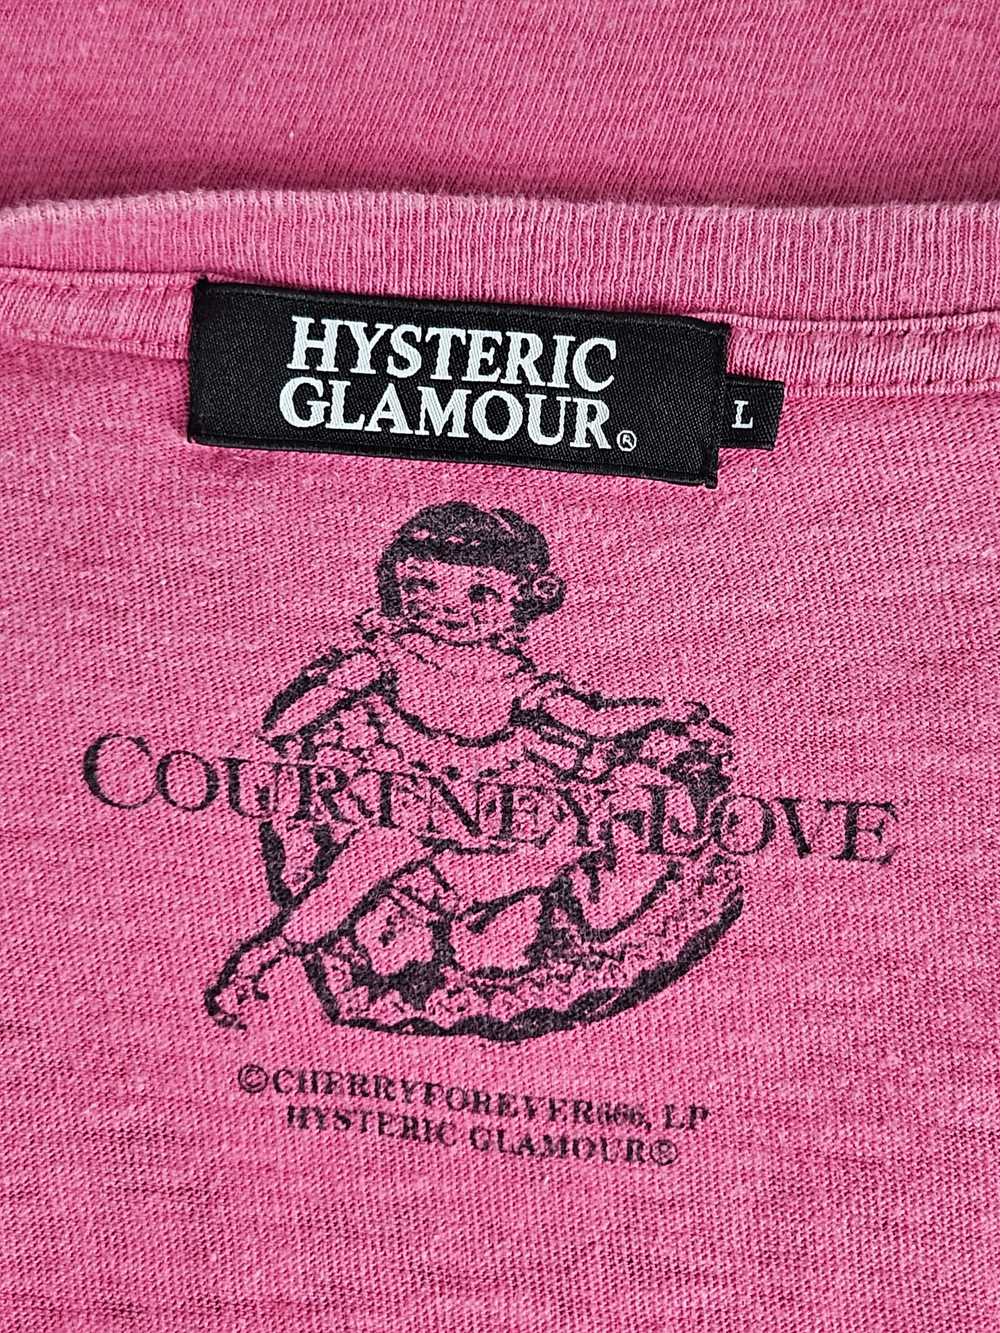 Hysteric Glamour Hysteric Glamour Courtney Love H… - image 4